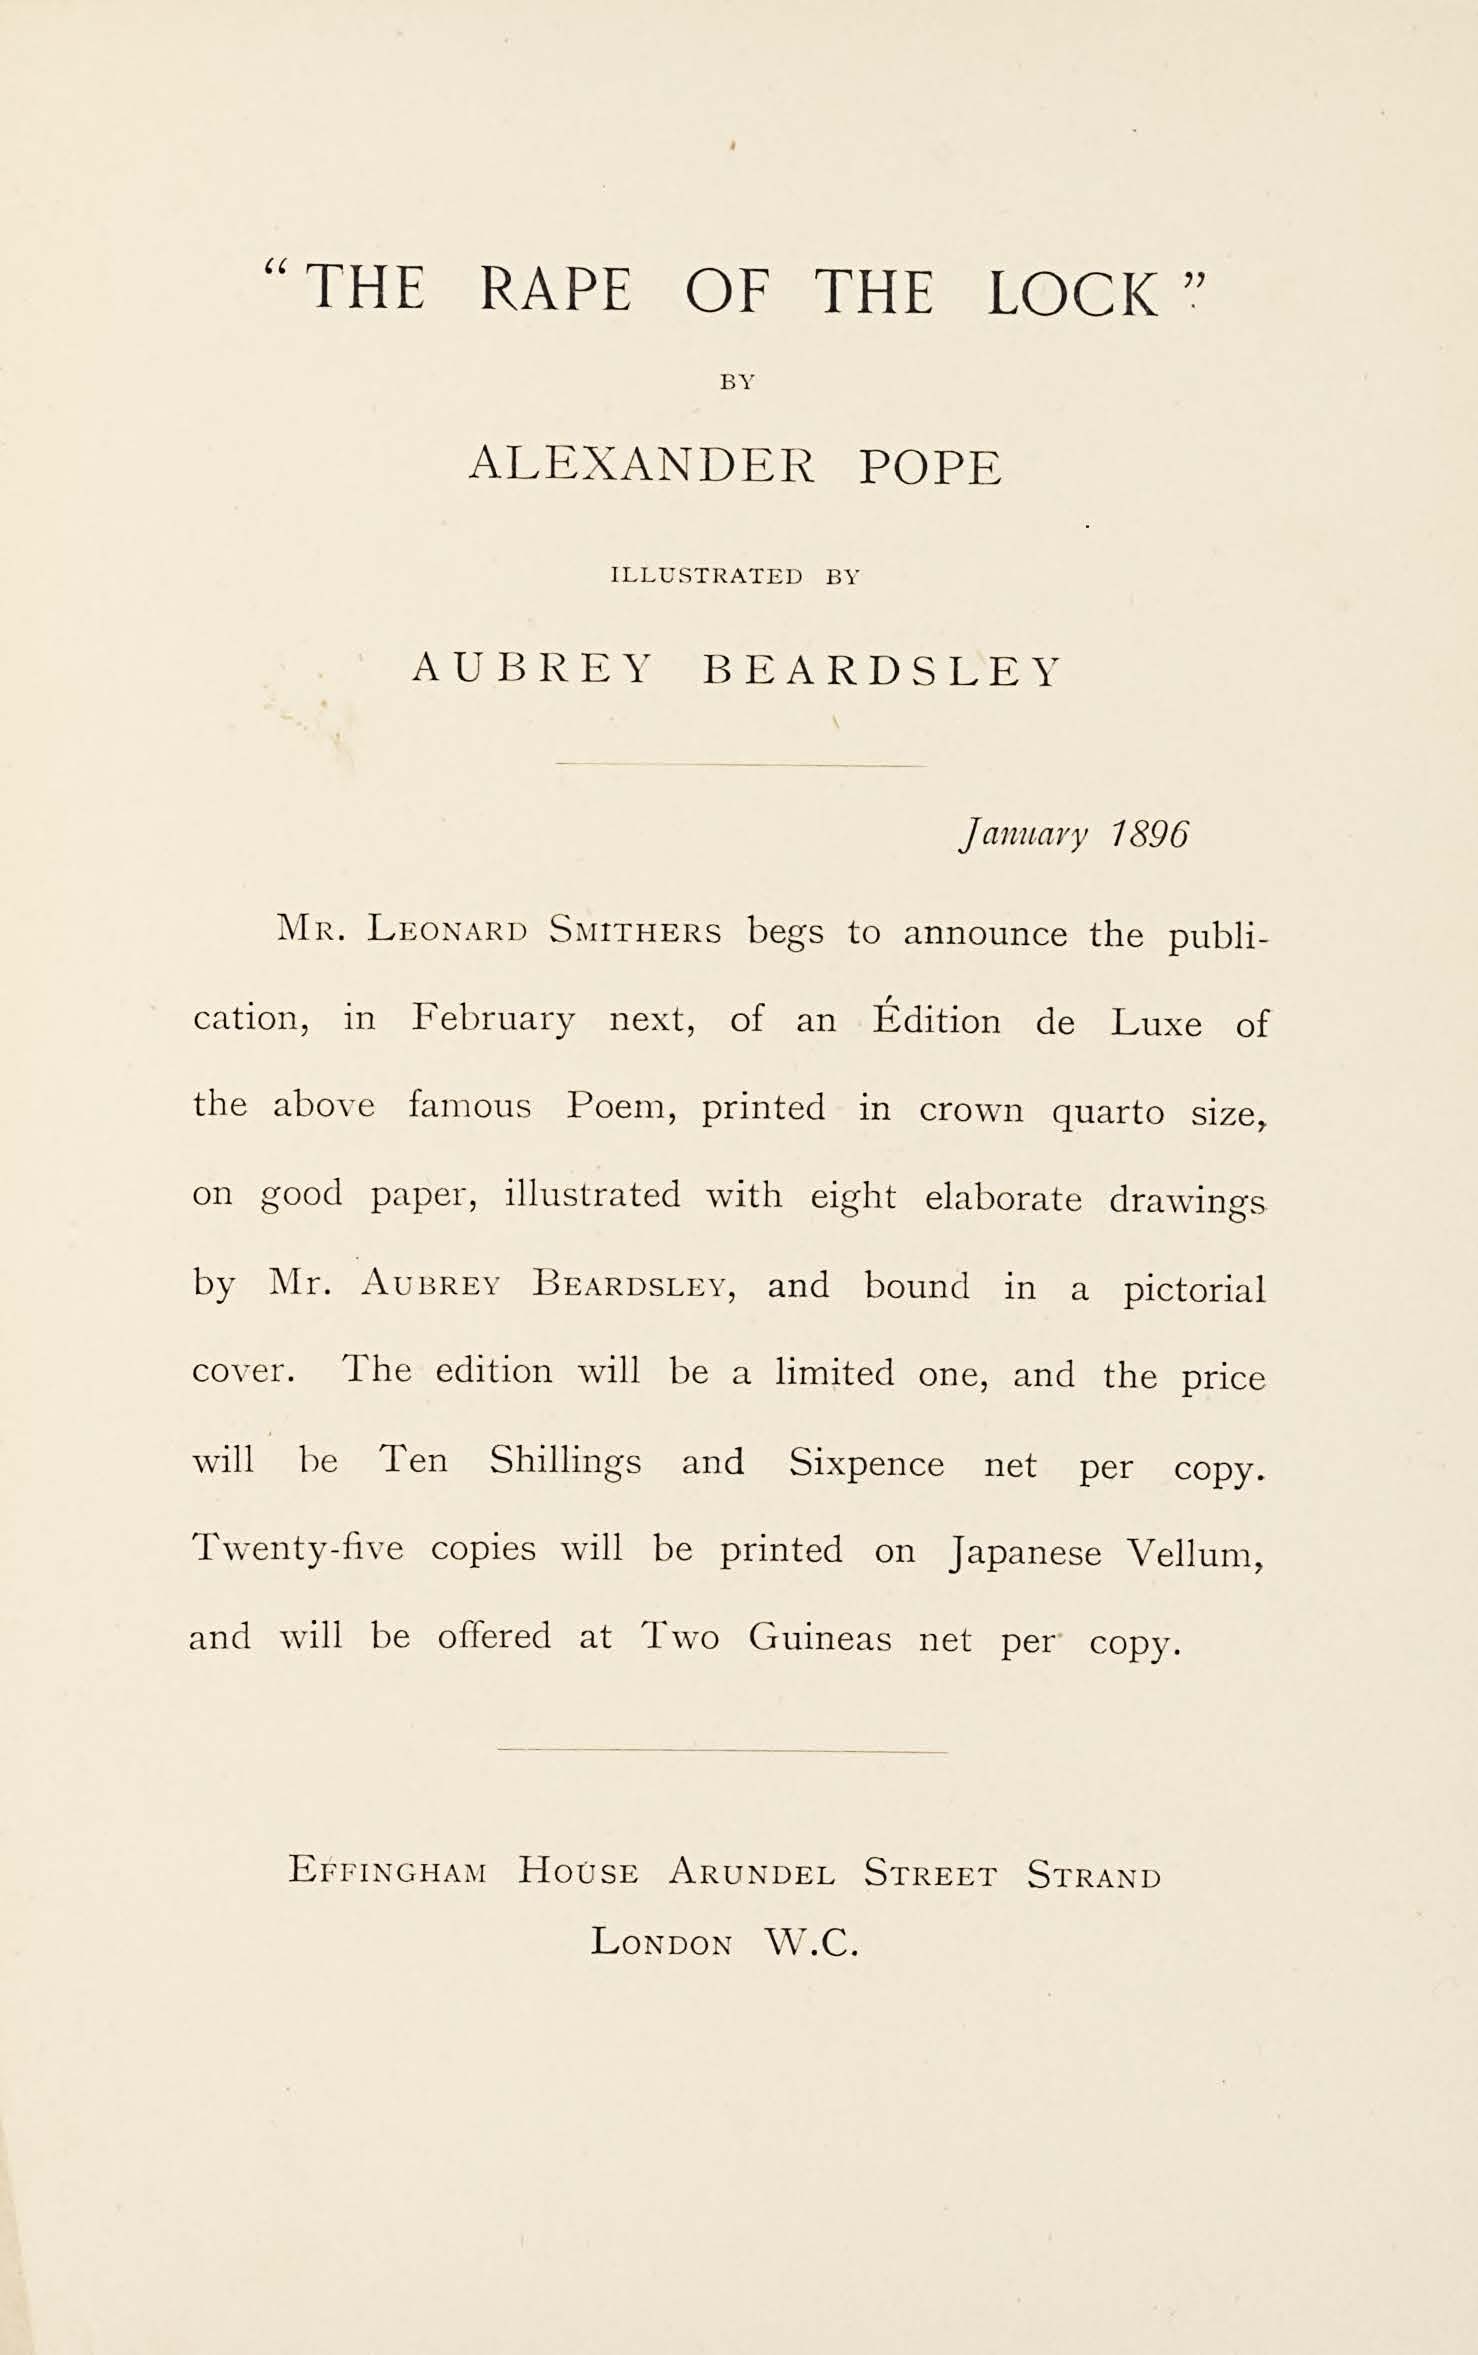 The Rape of The Lock by Alexander Pope. Illustrated by Aubrey Breadsley. January 1896. Mr. Leonard Smithers begs toa nnounce the publication, in February next, of an Edition de Luxe of the above famous Poem, printed in crown quarto size, on good paper, illustrated with eight elaborate drawings by Mr. Aubrey Beardsley, and cound in a pictorial cover. The edition will be a limited one, and the price will be Ten Shillings and Sixpence net percopy. Twenty-five copies will be printed on Japanese Vellum, and will be offered at Two Guineas net per copy. Effingham House Arundel Street Strand, London W.C.